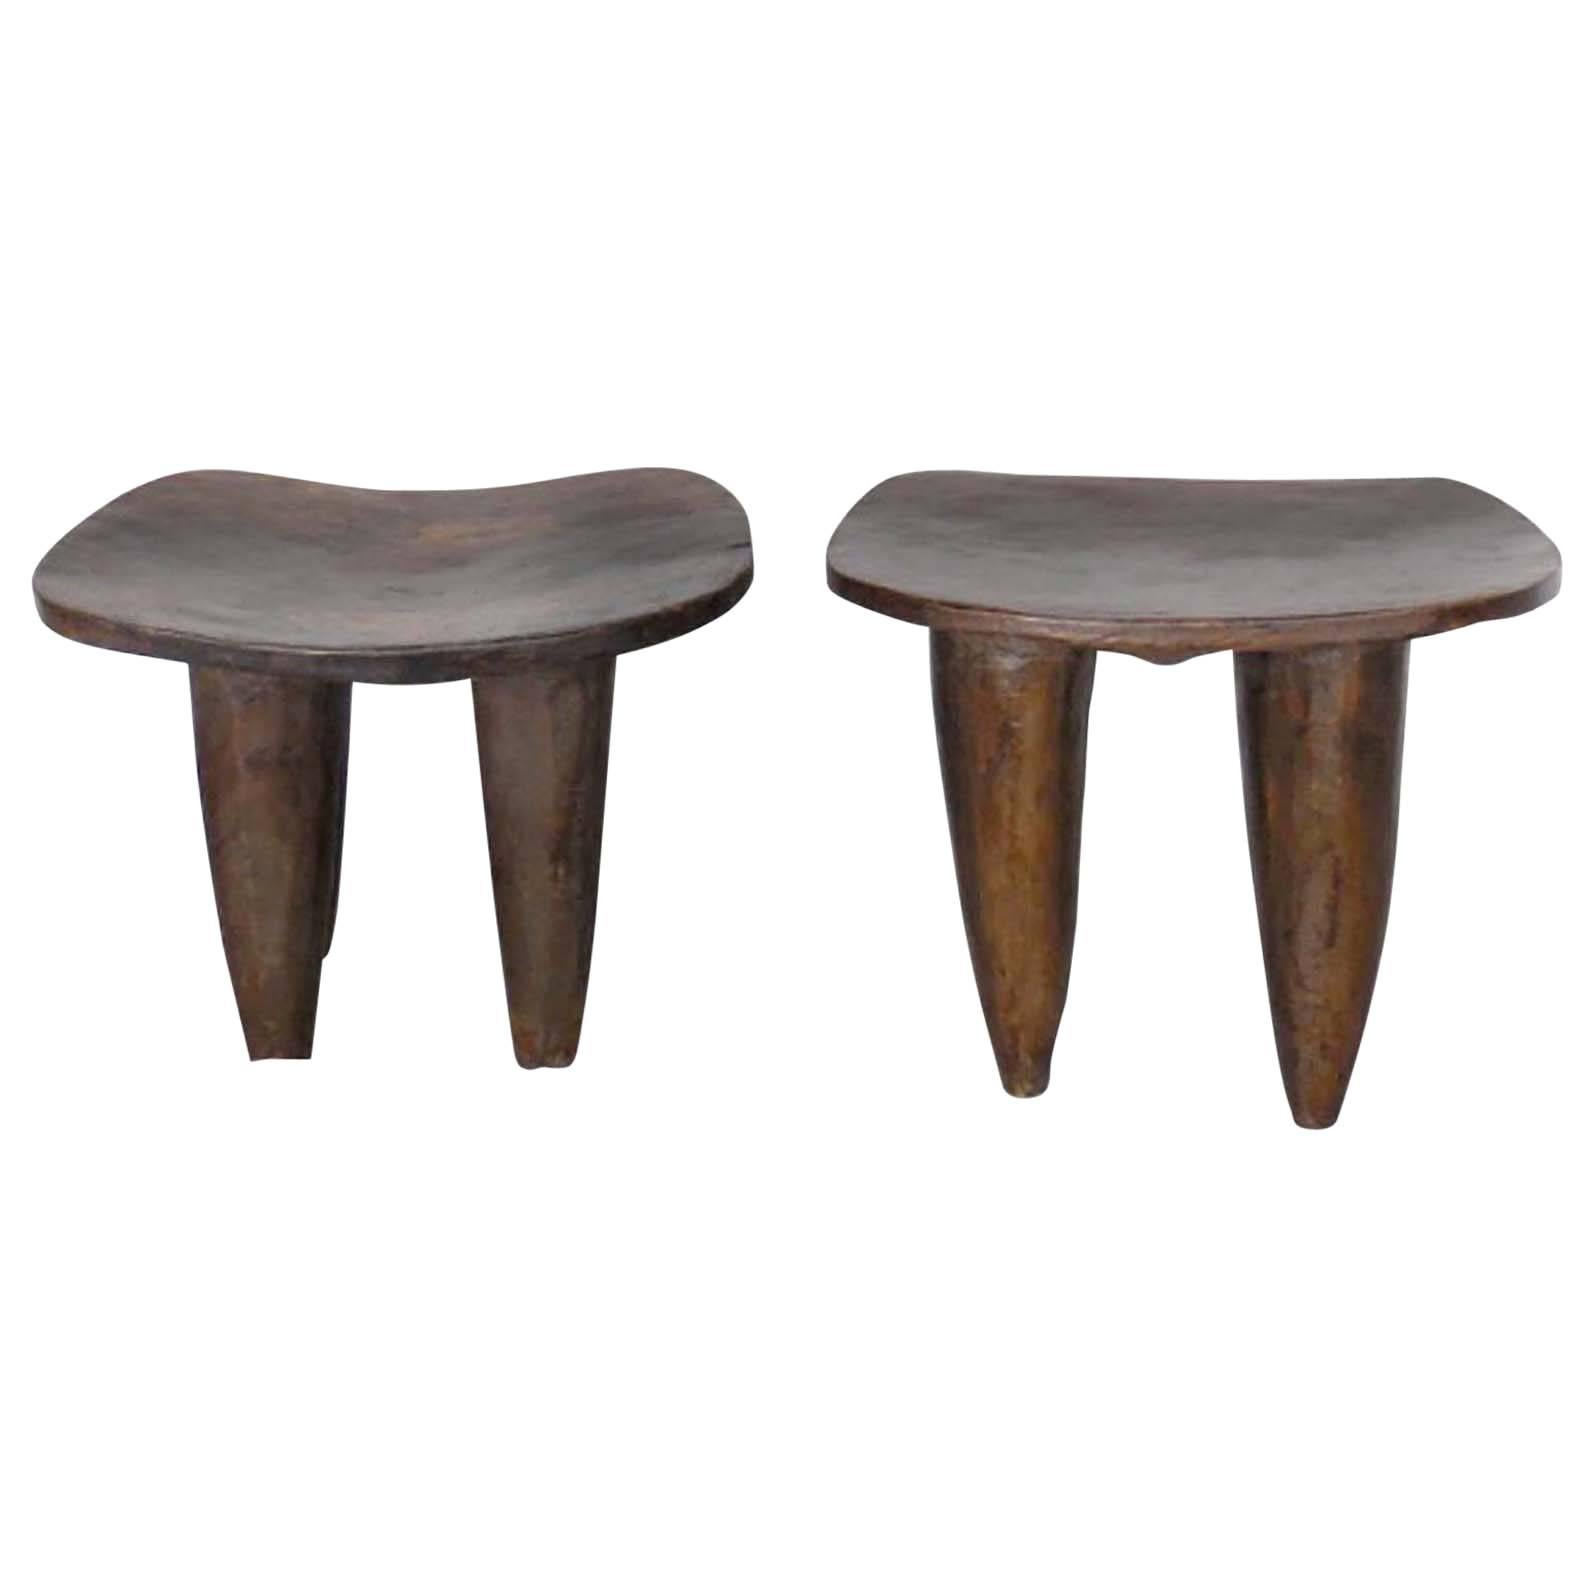 Tribal Hand-Carved Stools from Mali